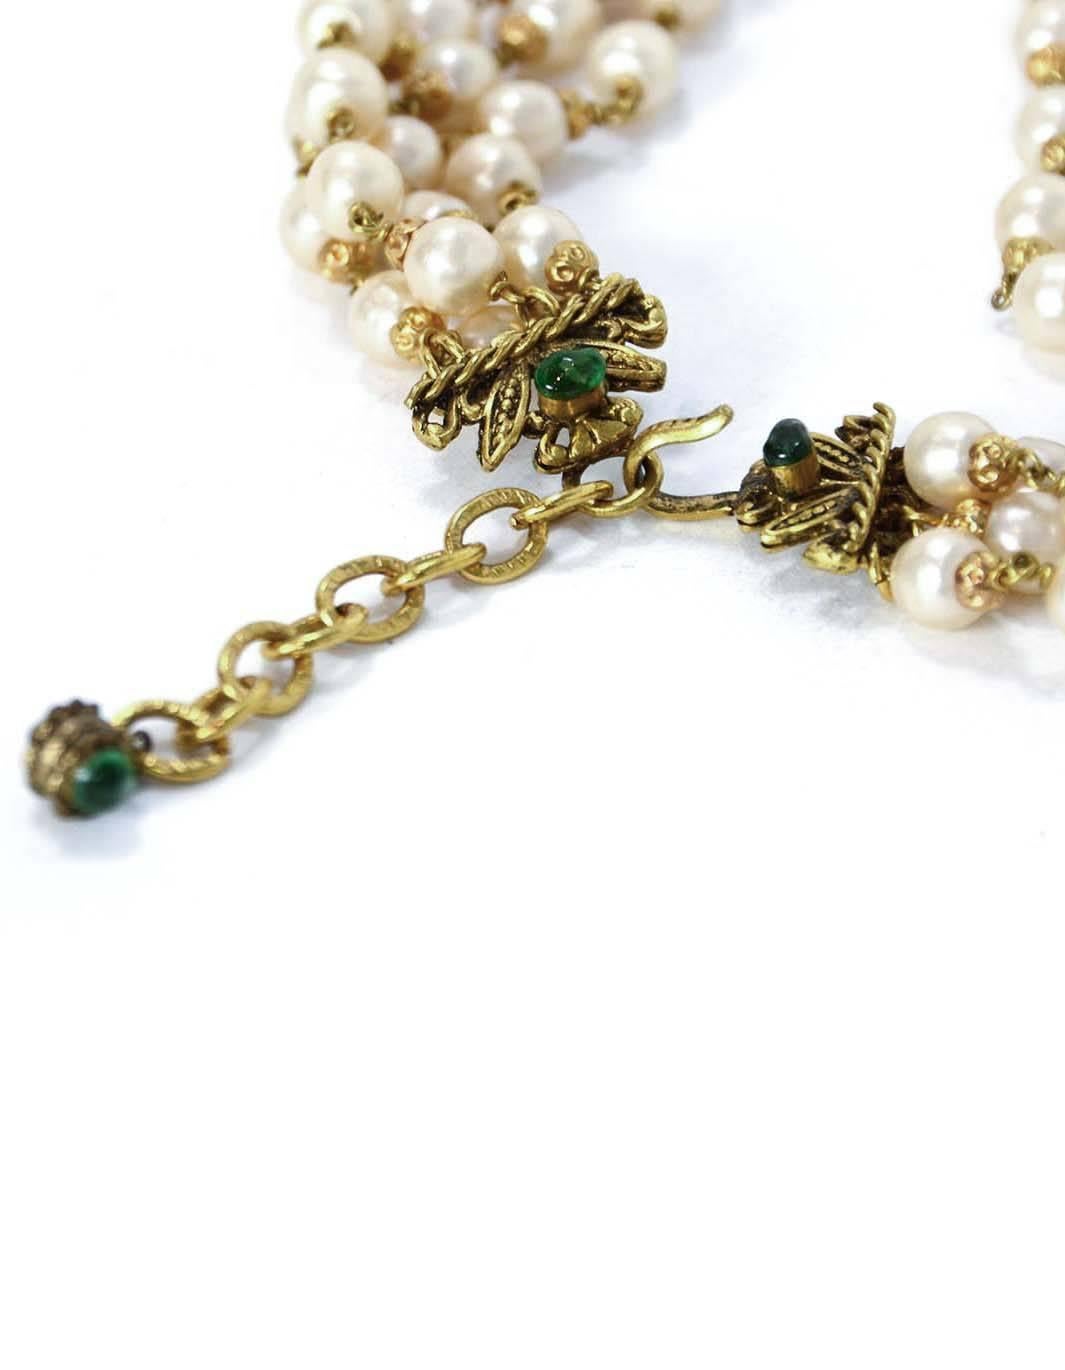 CHANEL Vintage '70s Multi-Strand Pearl & Green Gripoix Drop Necklace
Features four brass pendants with gripoix accents. Each pendant is dripping with pearl strands with green gripoix bead at ends. This necklace is such an amazing piece perfect